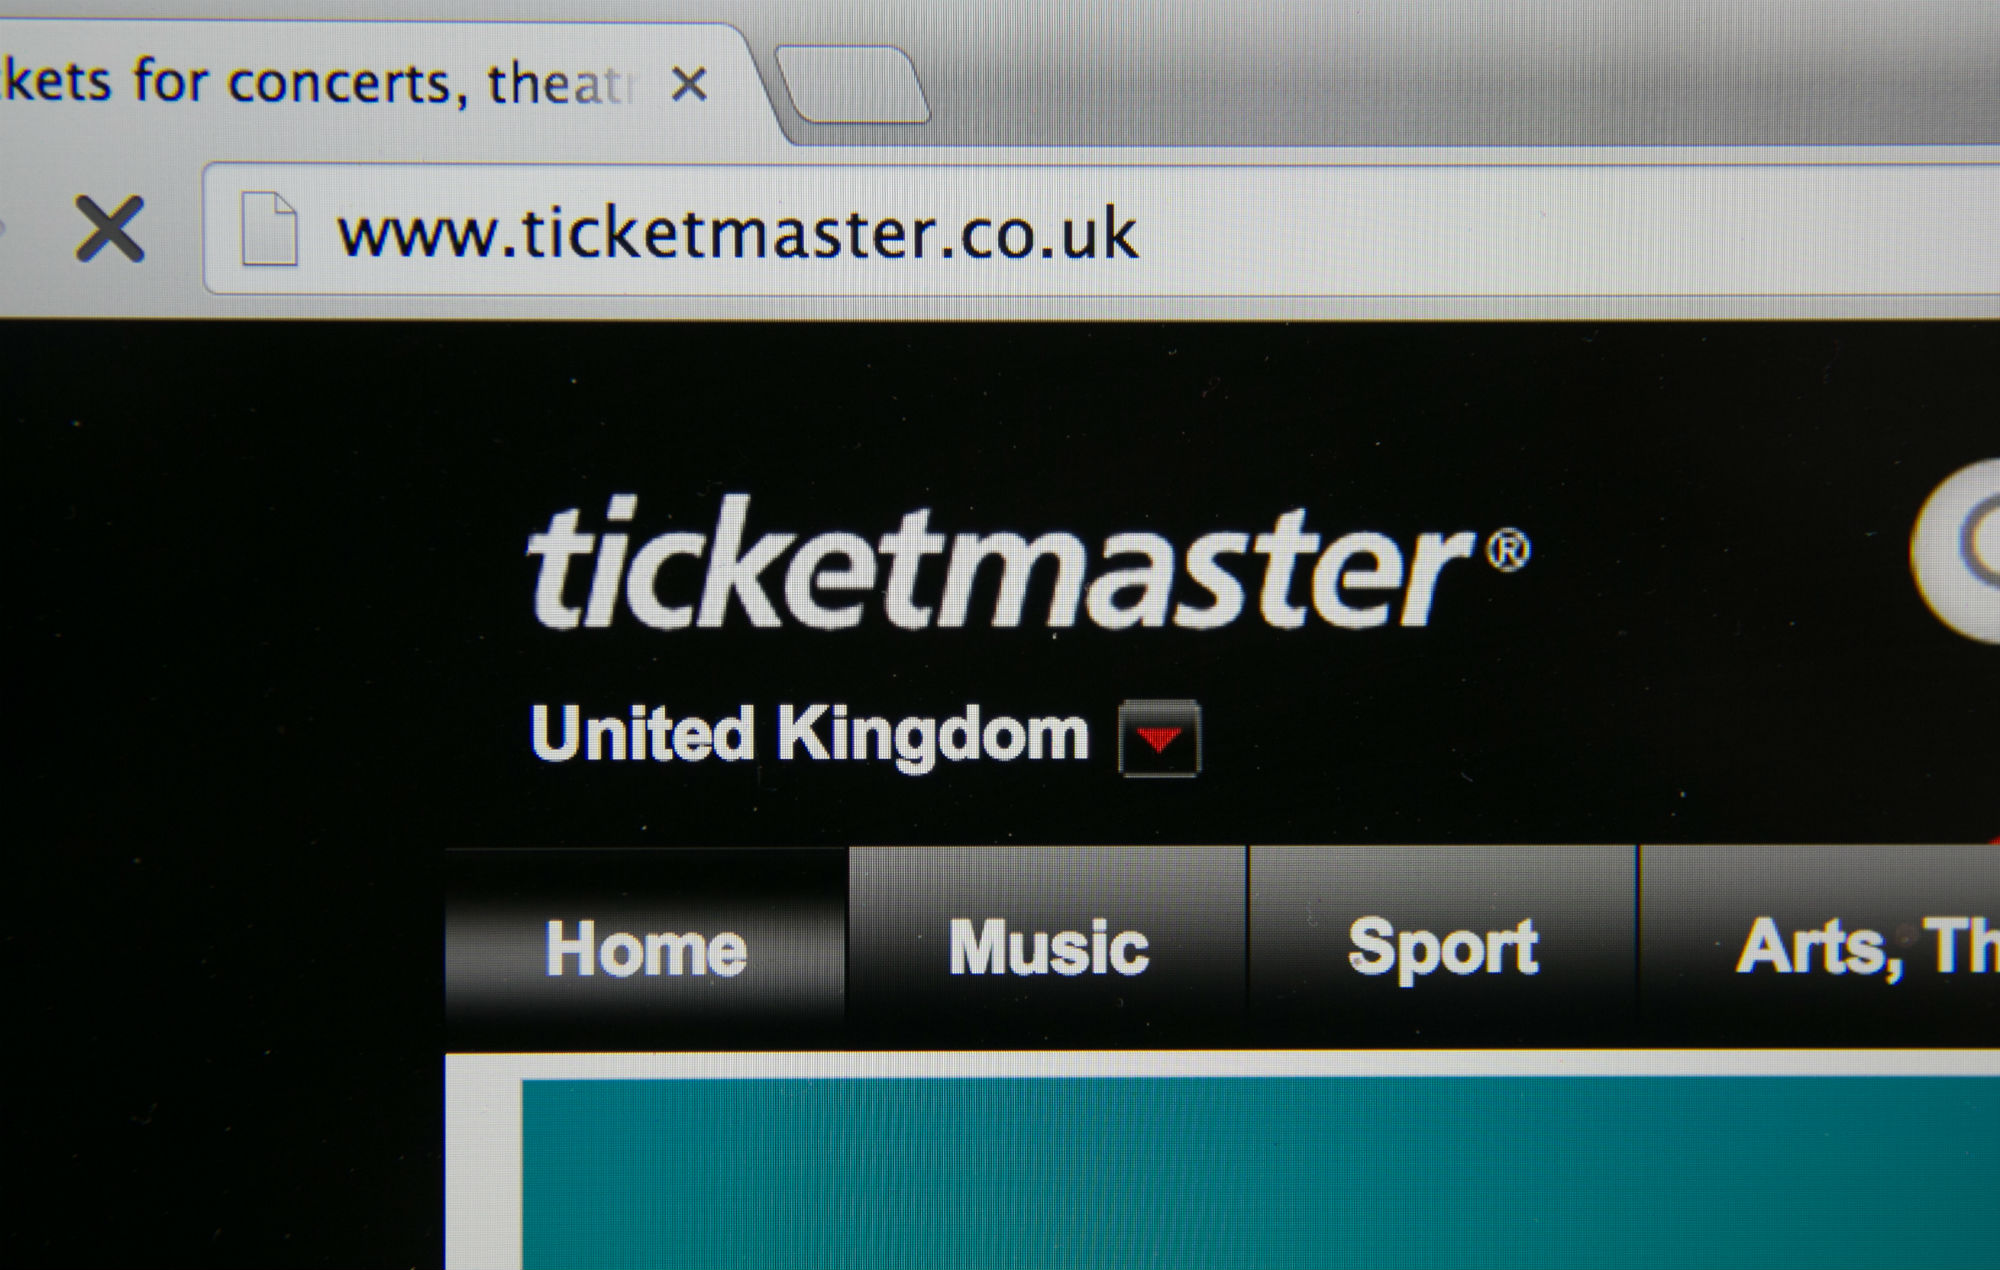 Live Nation and Ticketmaster look to enforce laws against touts and scalping websites